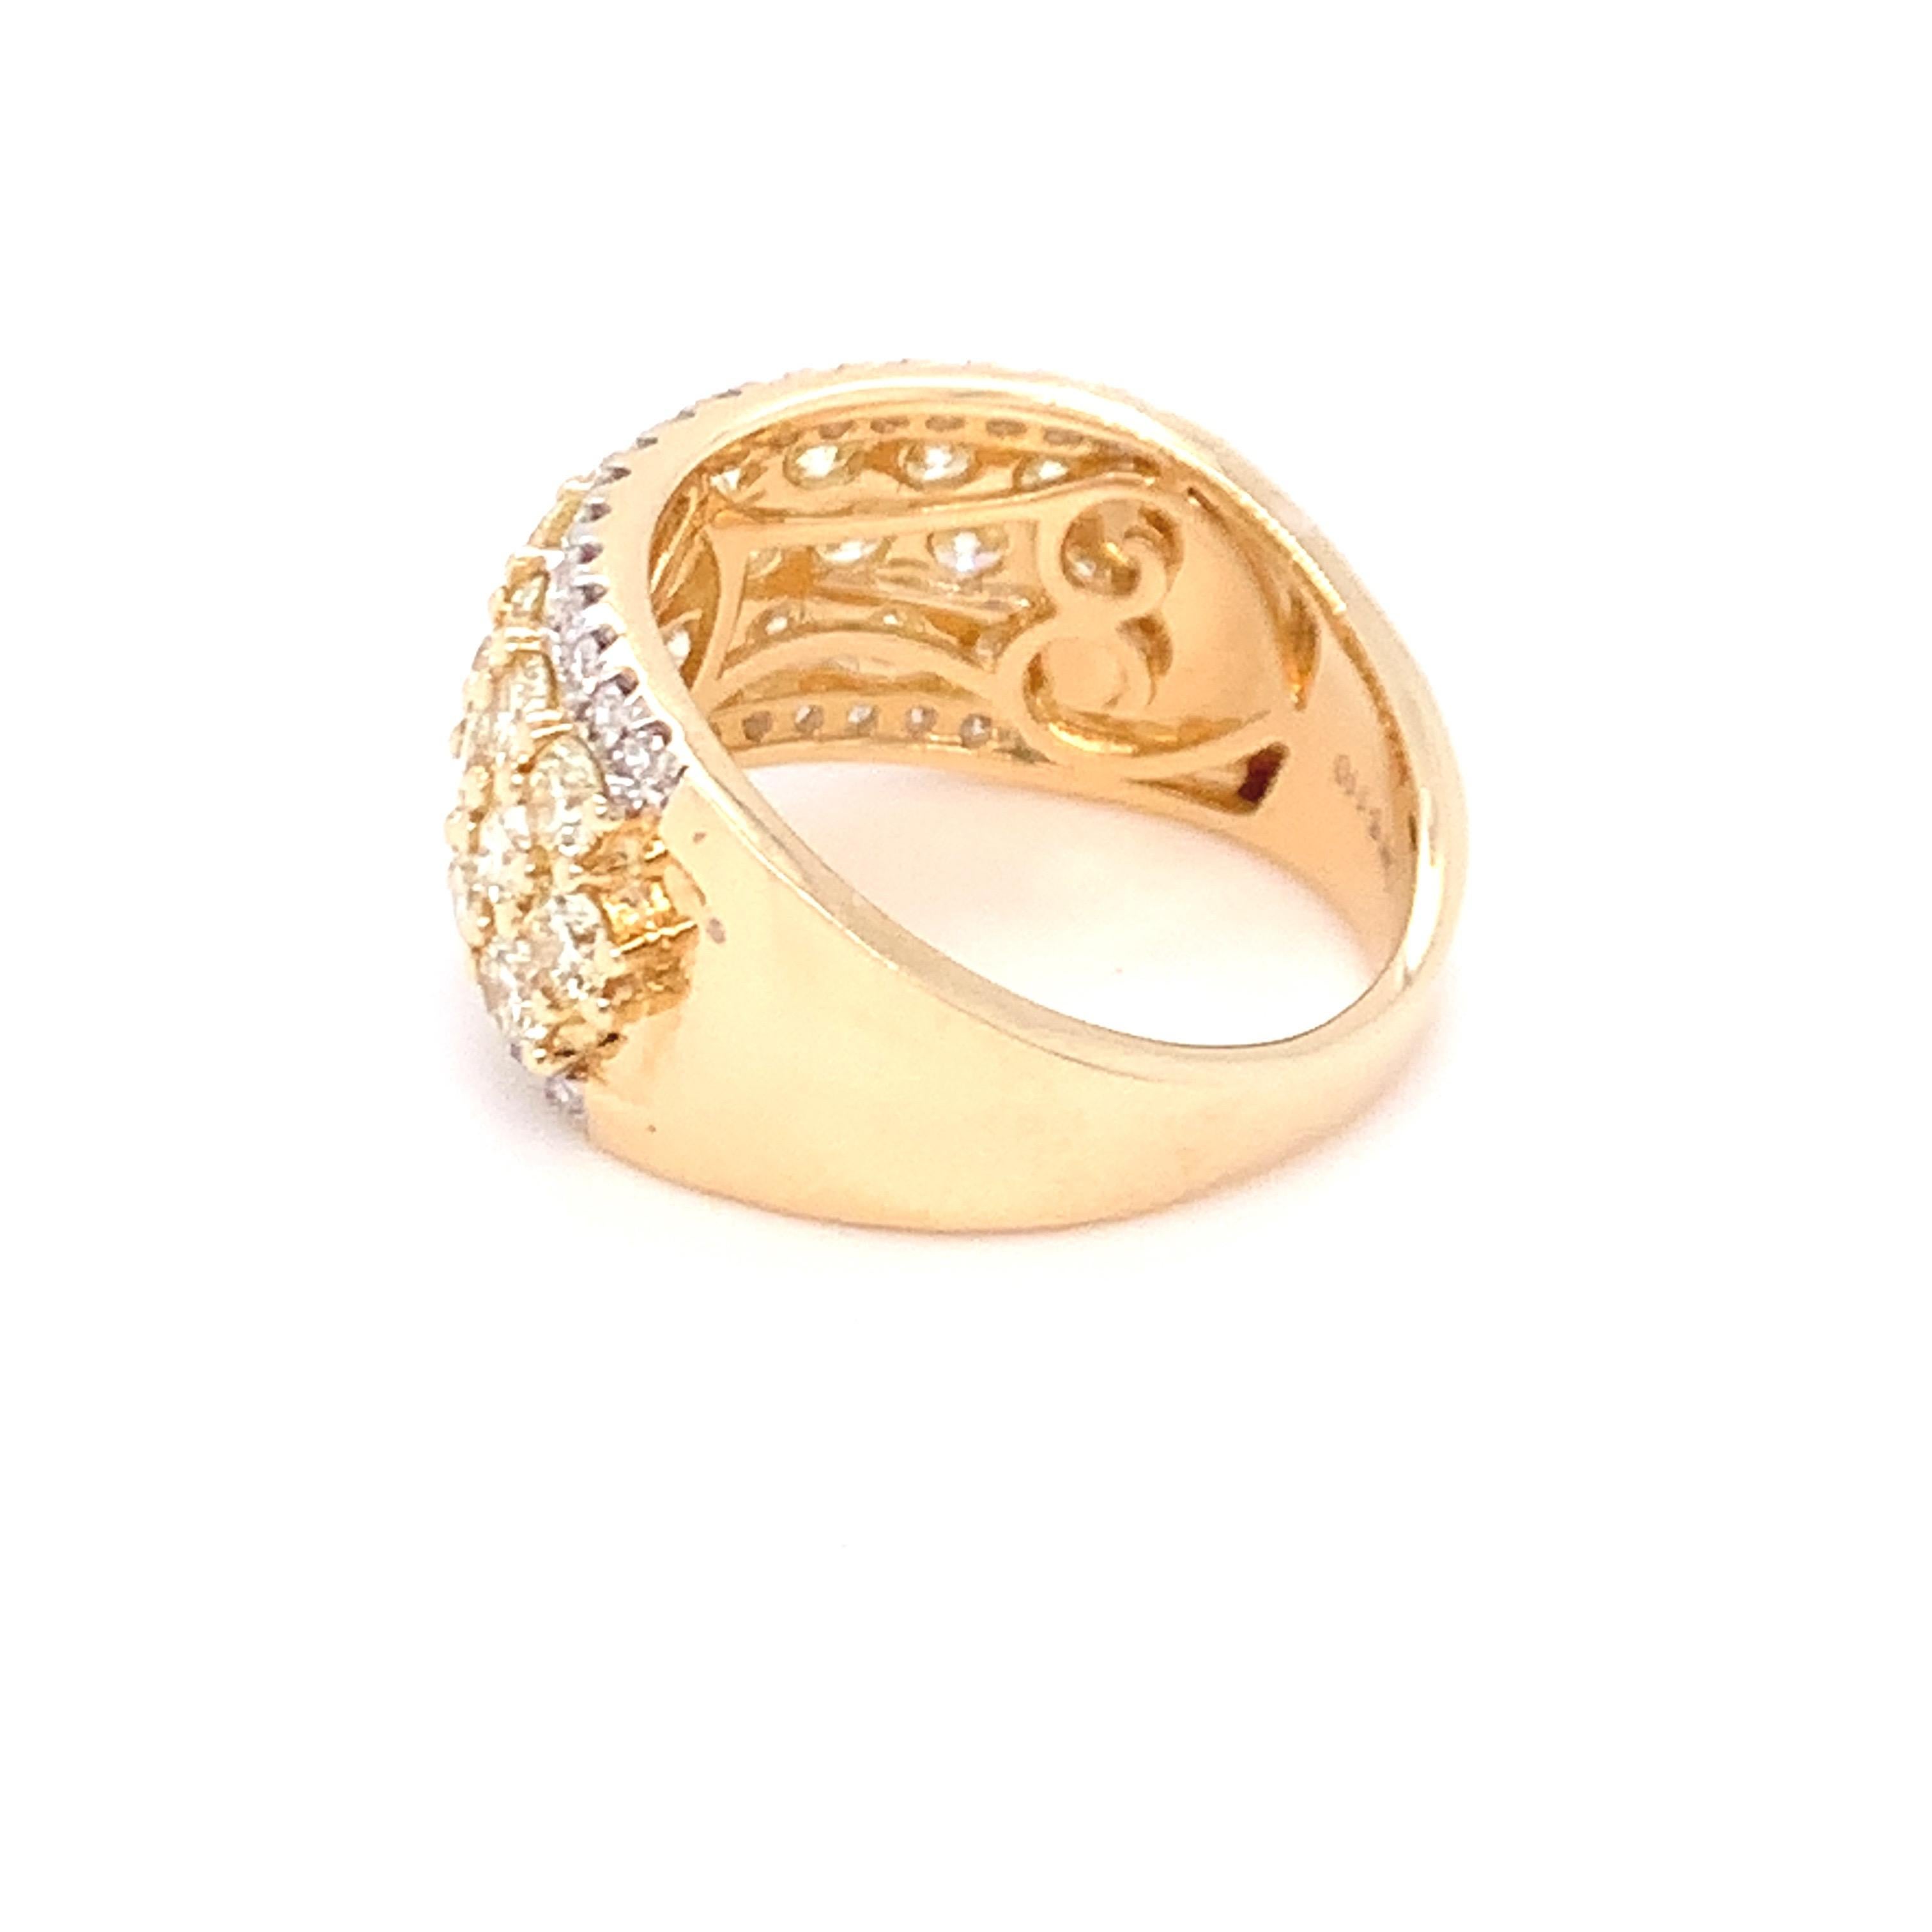 2.50 Carat Yellow & White Diamond Band Ring in 14k Yellow Gold For Sale 10